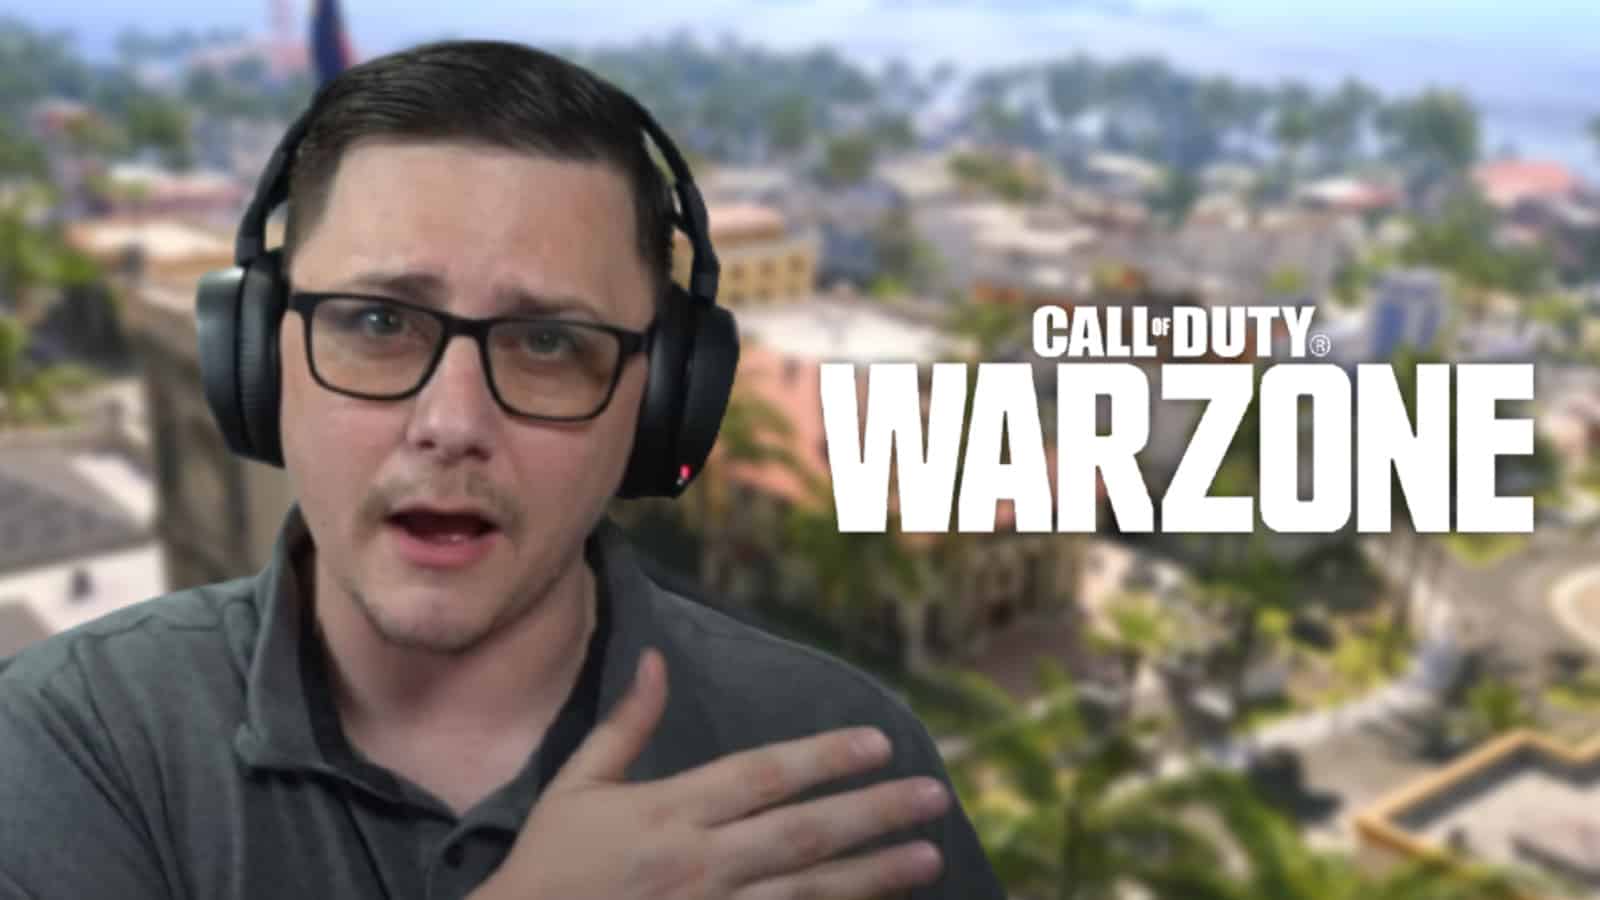 JGOD claims Warzone devs need to fix simple bugs before players quit